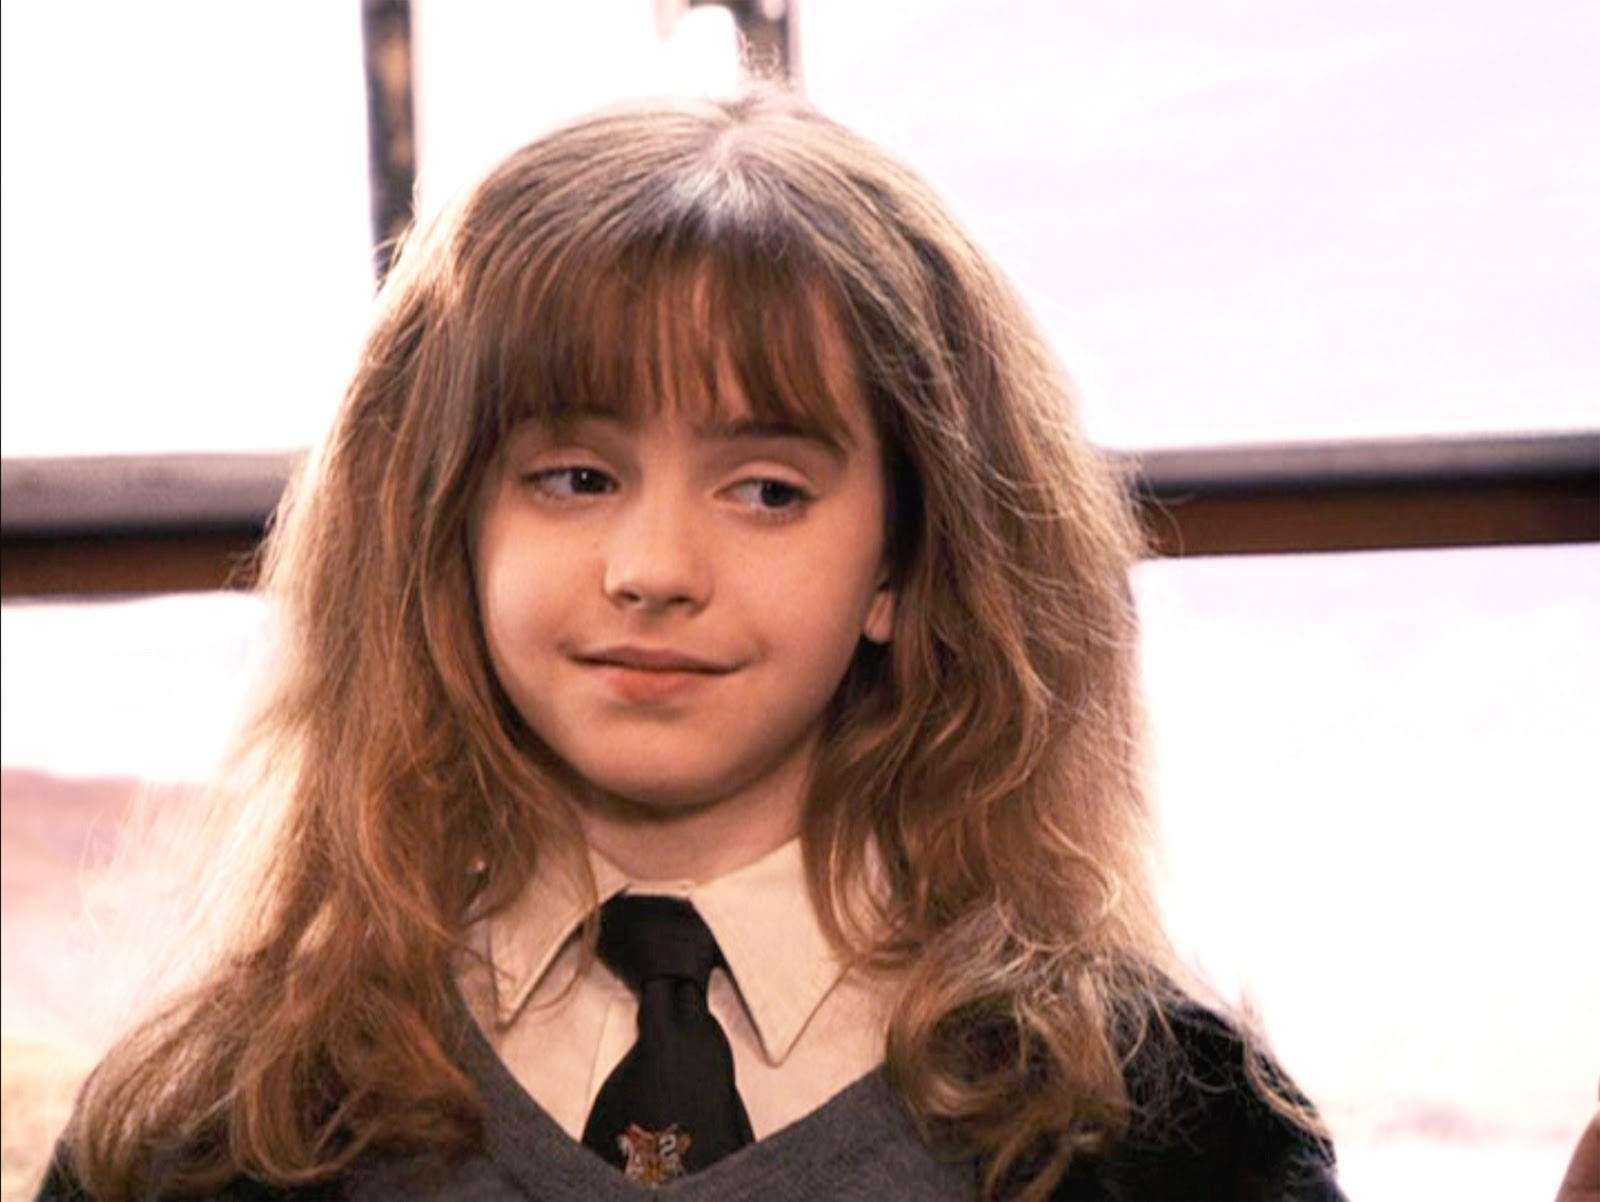 11 Hermione Granger Reactions GIFs From 